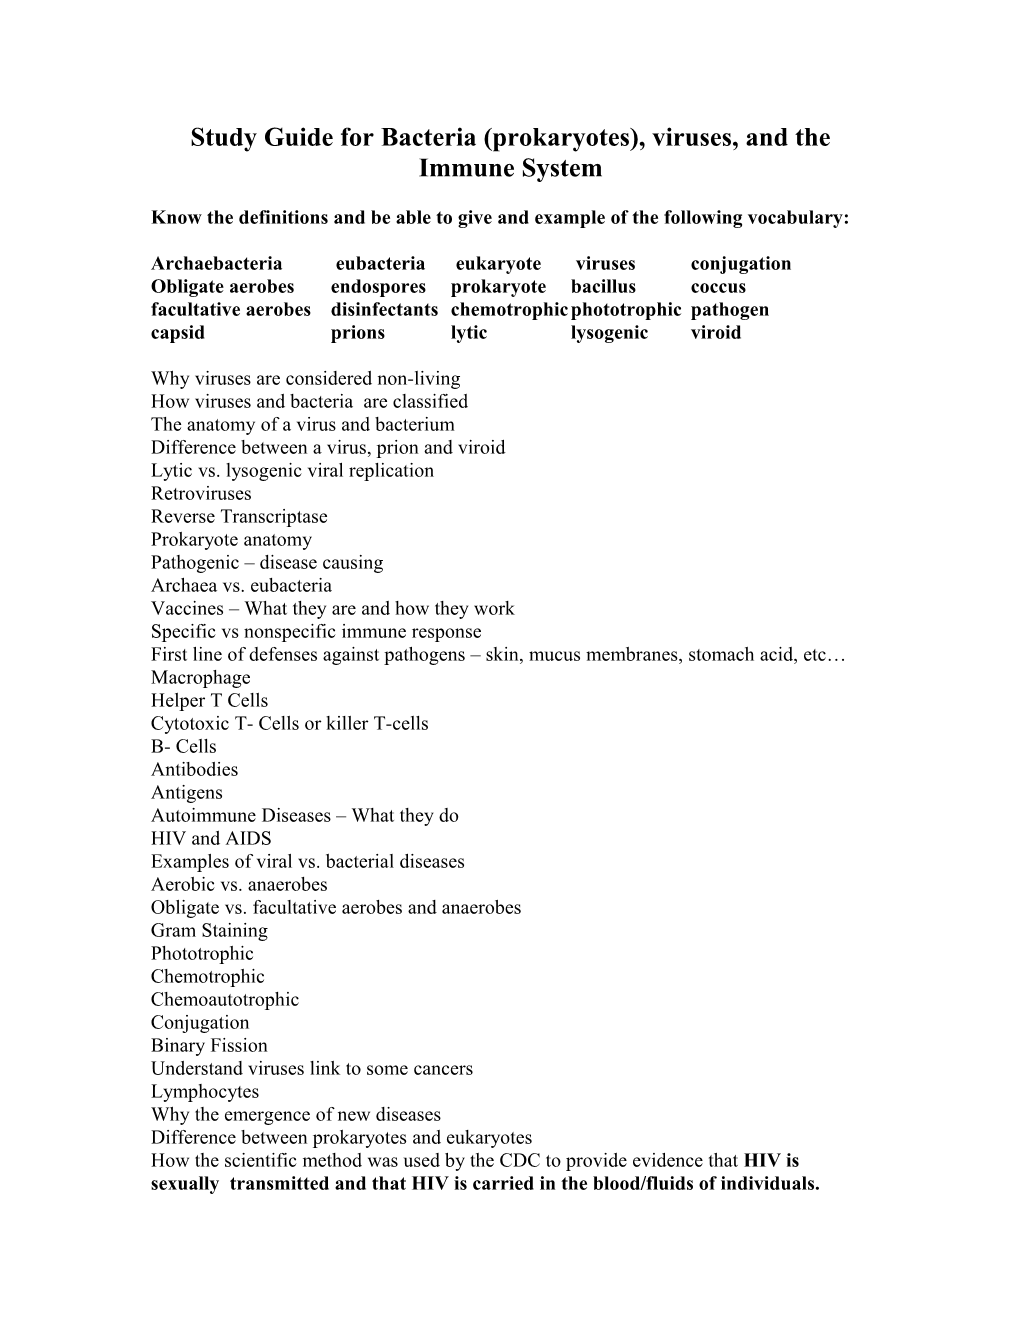 Study Guide for Bacteria (Prokaryotes), Viruses, and the Immune System